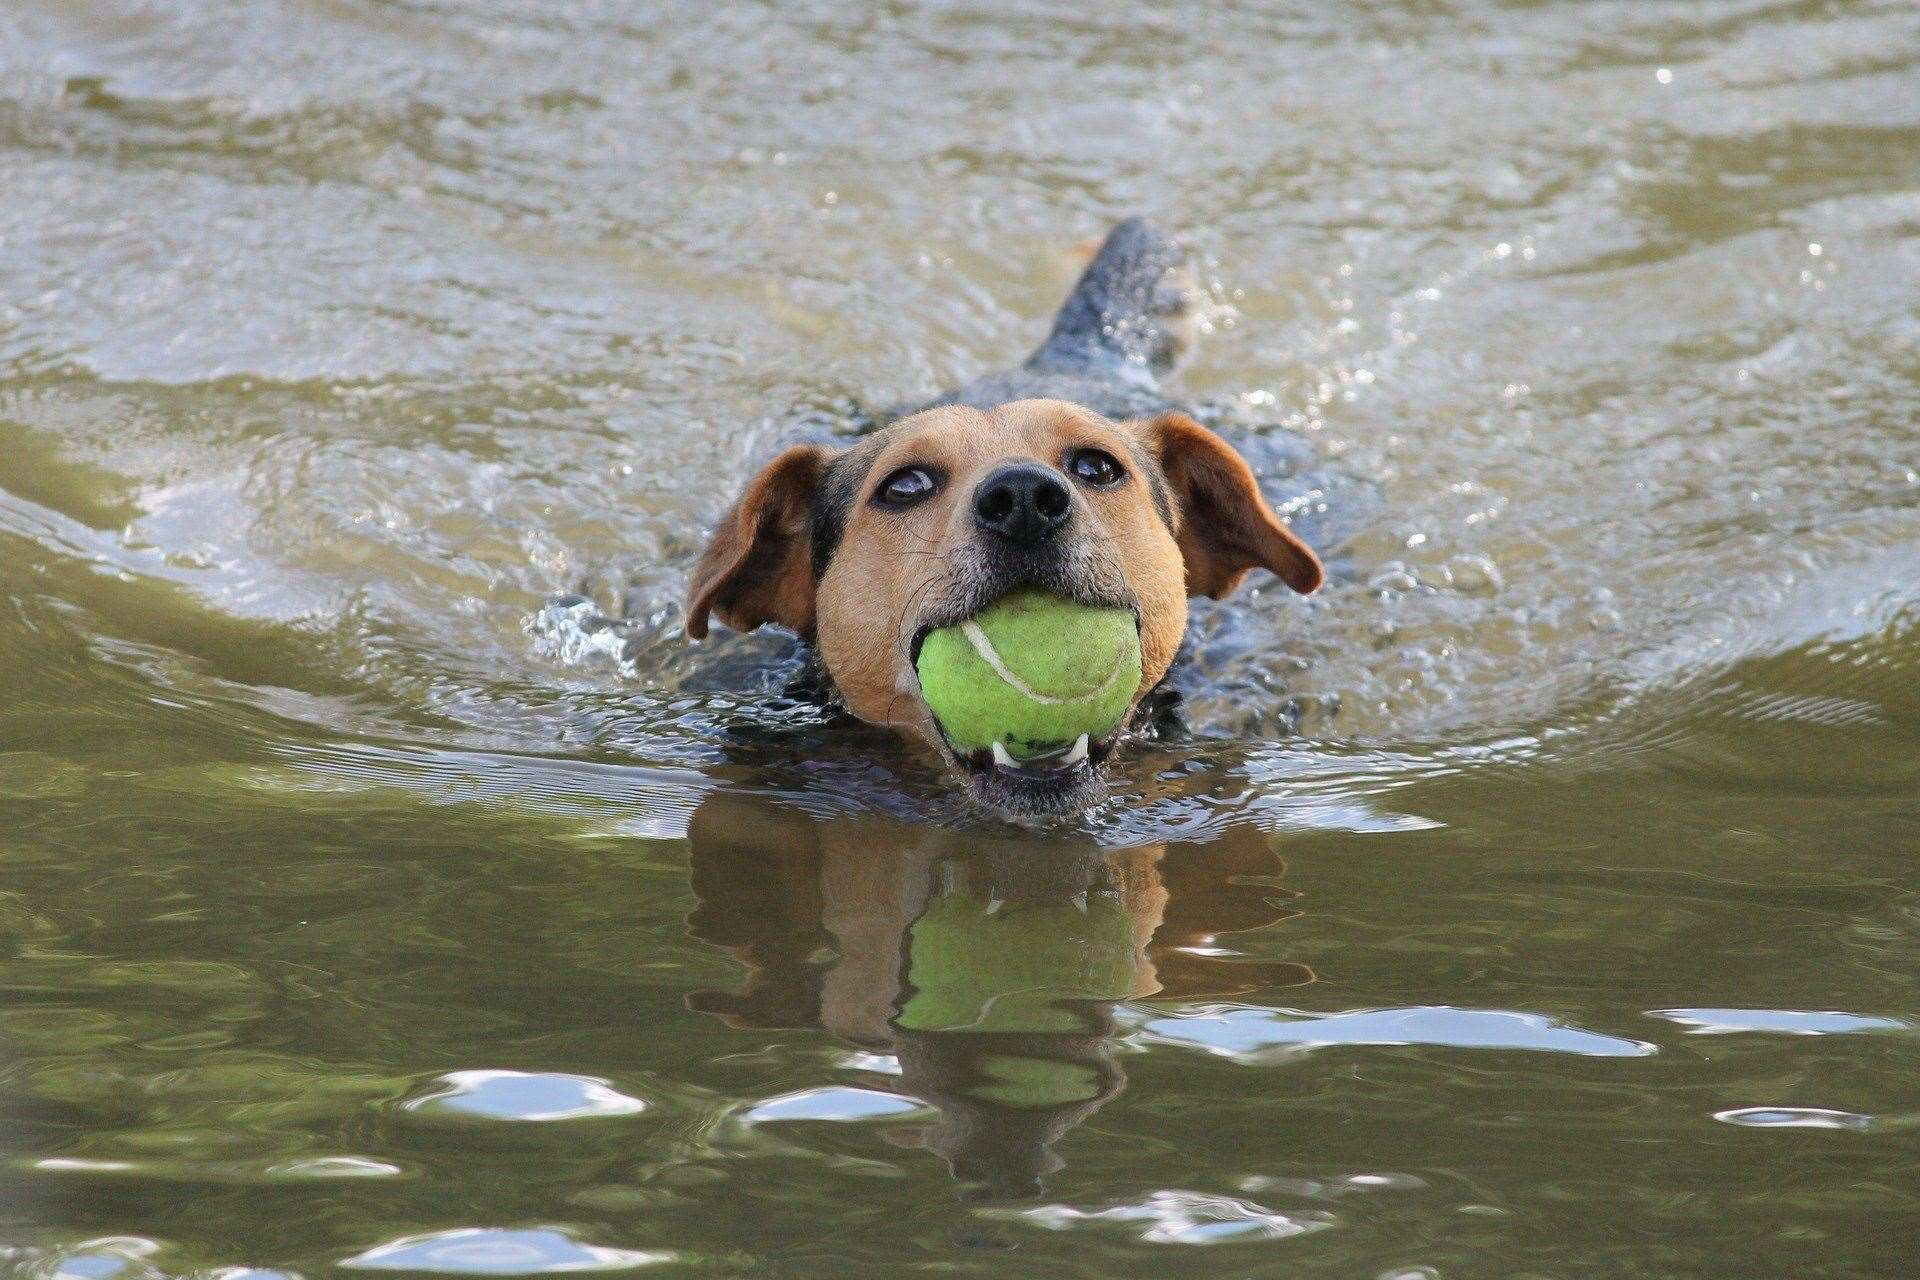 Not all dogs are confident swimmers